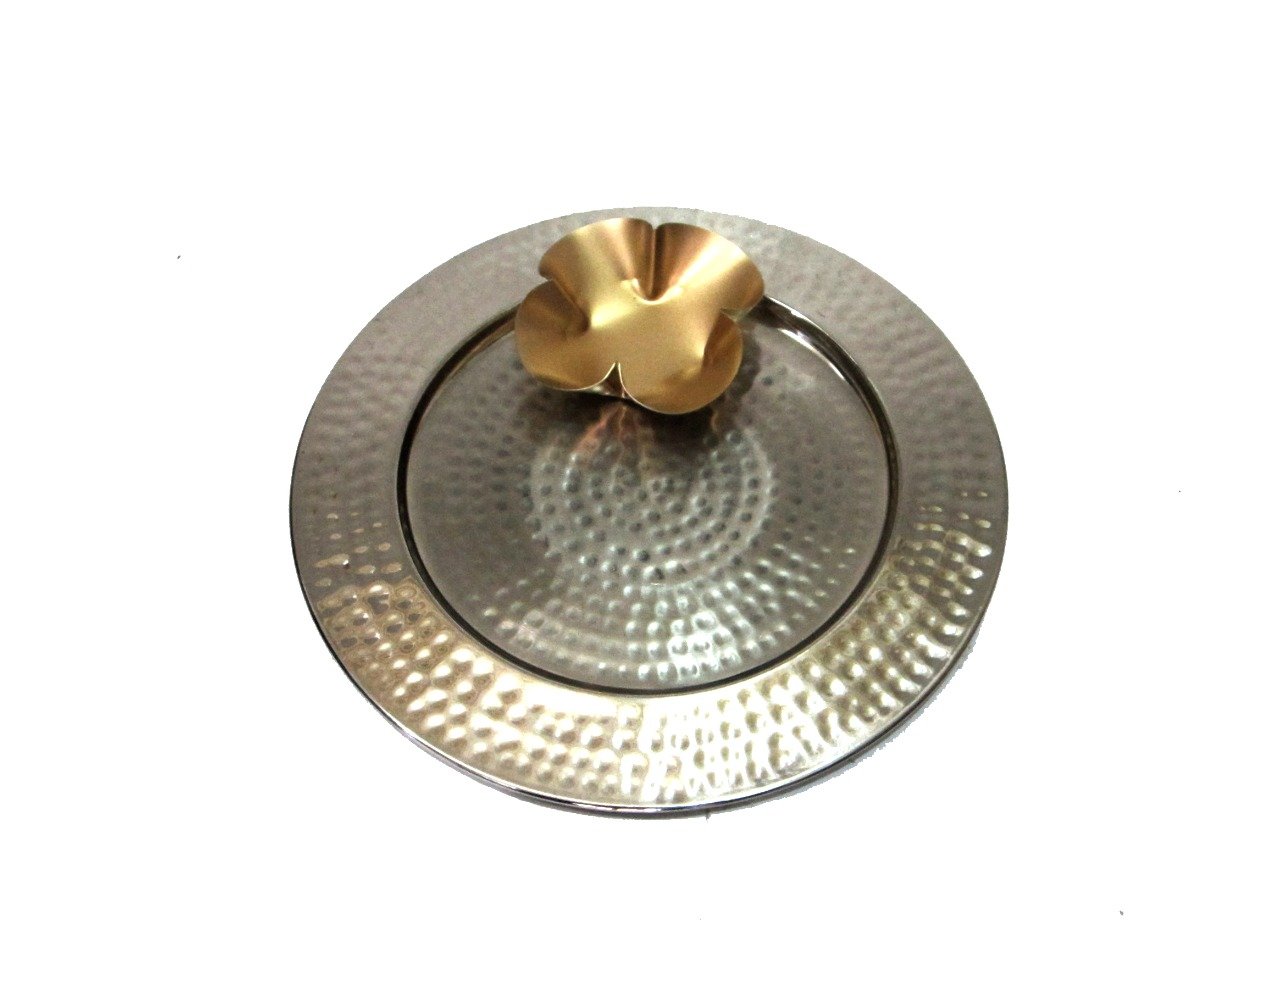 Pooja Thali, Gift Tray, Dry Fruit Packing, Gift Packing, Return Gift, Wedding Gift, Corporate Gift, Decorative, house2home, h2h, Steel Plate, Charger Plate